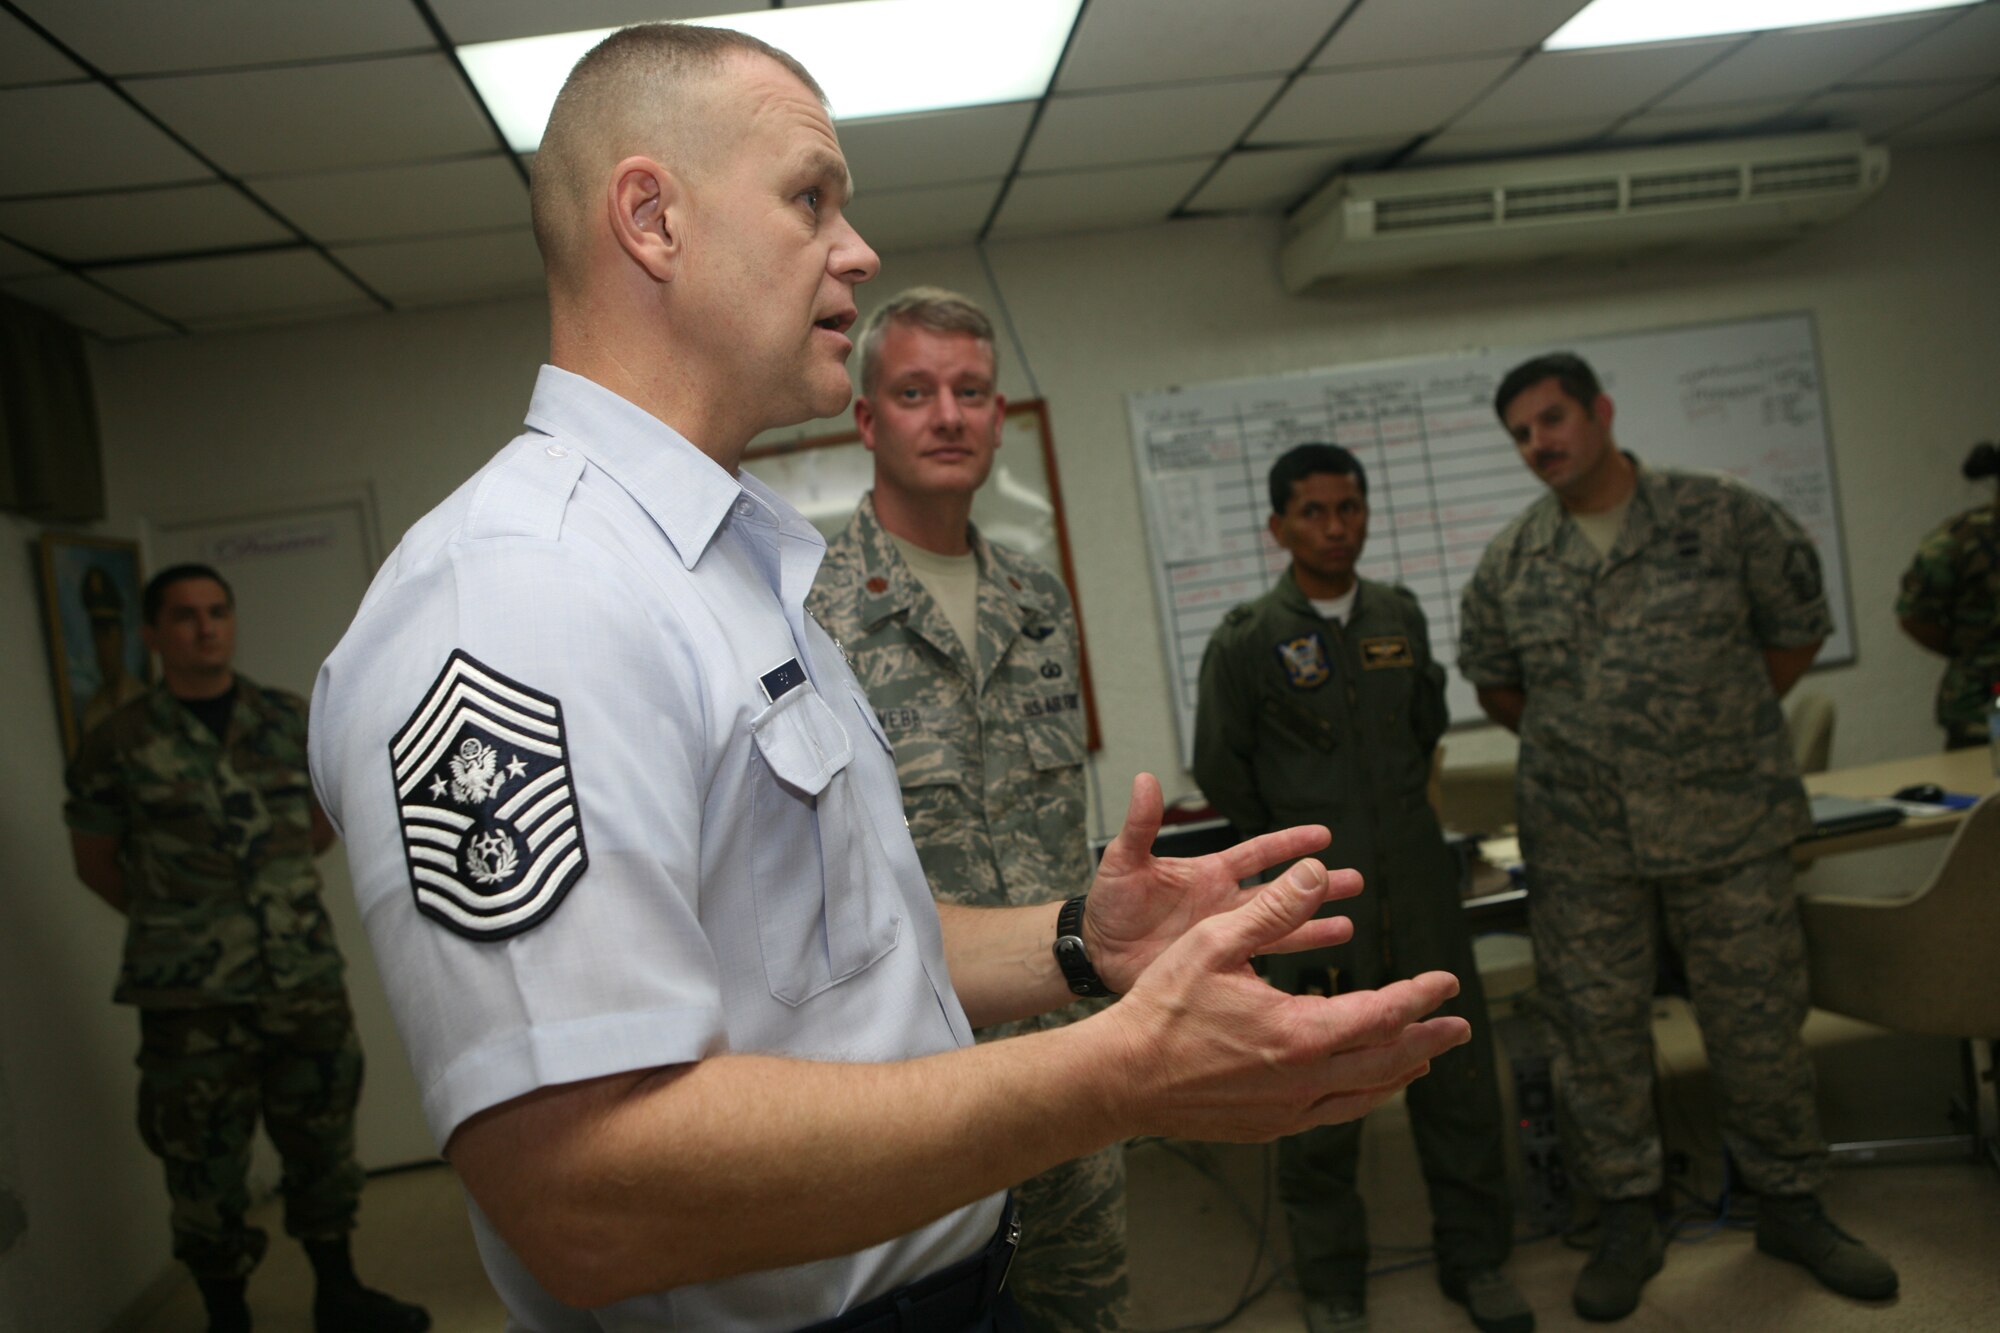 PANAMA CITY, Panama -- Chief Master Sgt. of the Air Force James A. Roy speaks to Airmen of the 612th Air Expeditionary Communications Squadron and members of the Panamanian Air Service deployed to Capitán Juan Delgado Air Base in Panama City, Panama, on Sept. 19, 2009, during Fuerzas Aliadas PANAMAX 2009. FA PANAMAX 2009 is a multinational exercise with 20 participating countries tailored to the defense of the Panama Canal, involving over 4,500 personnel from the U. S. Southern Command area of focus. (U.S. Navy photo by Mass Communication Specialist 1st Class David P. Coleman)